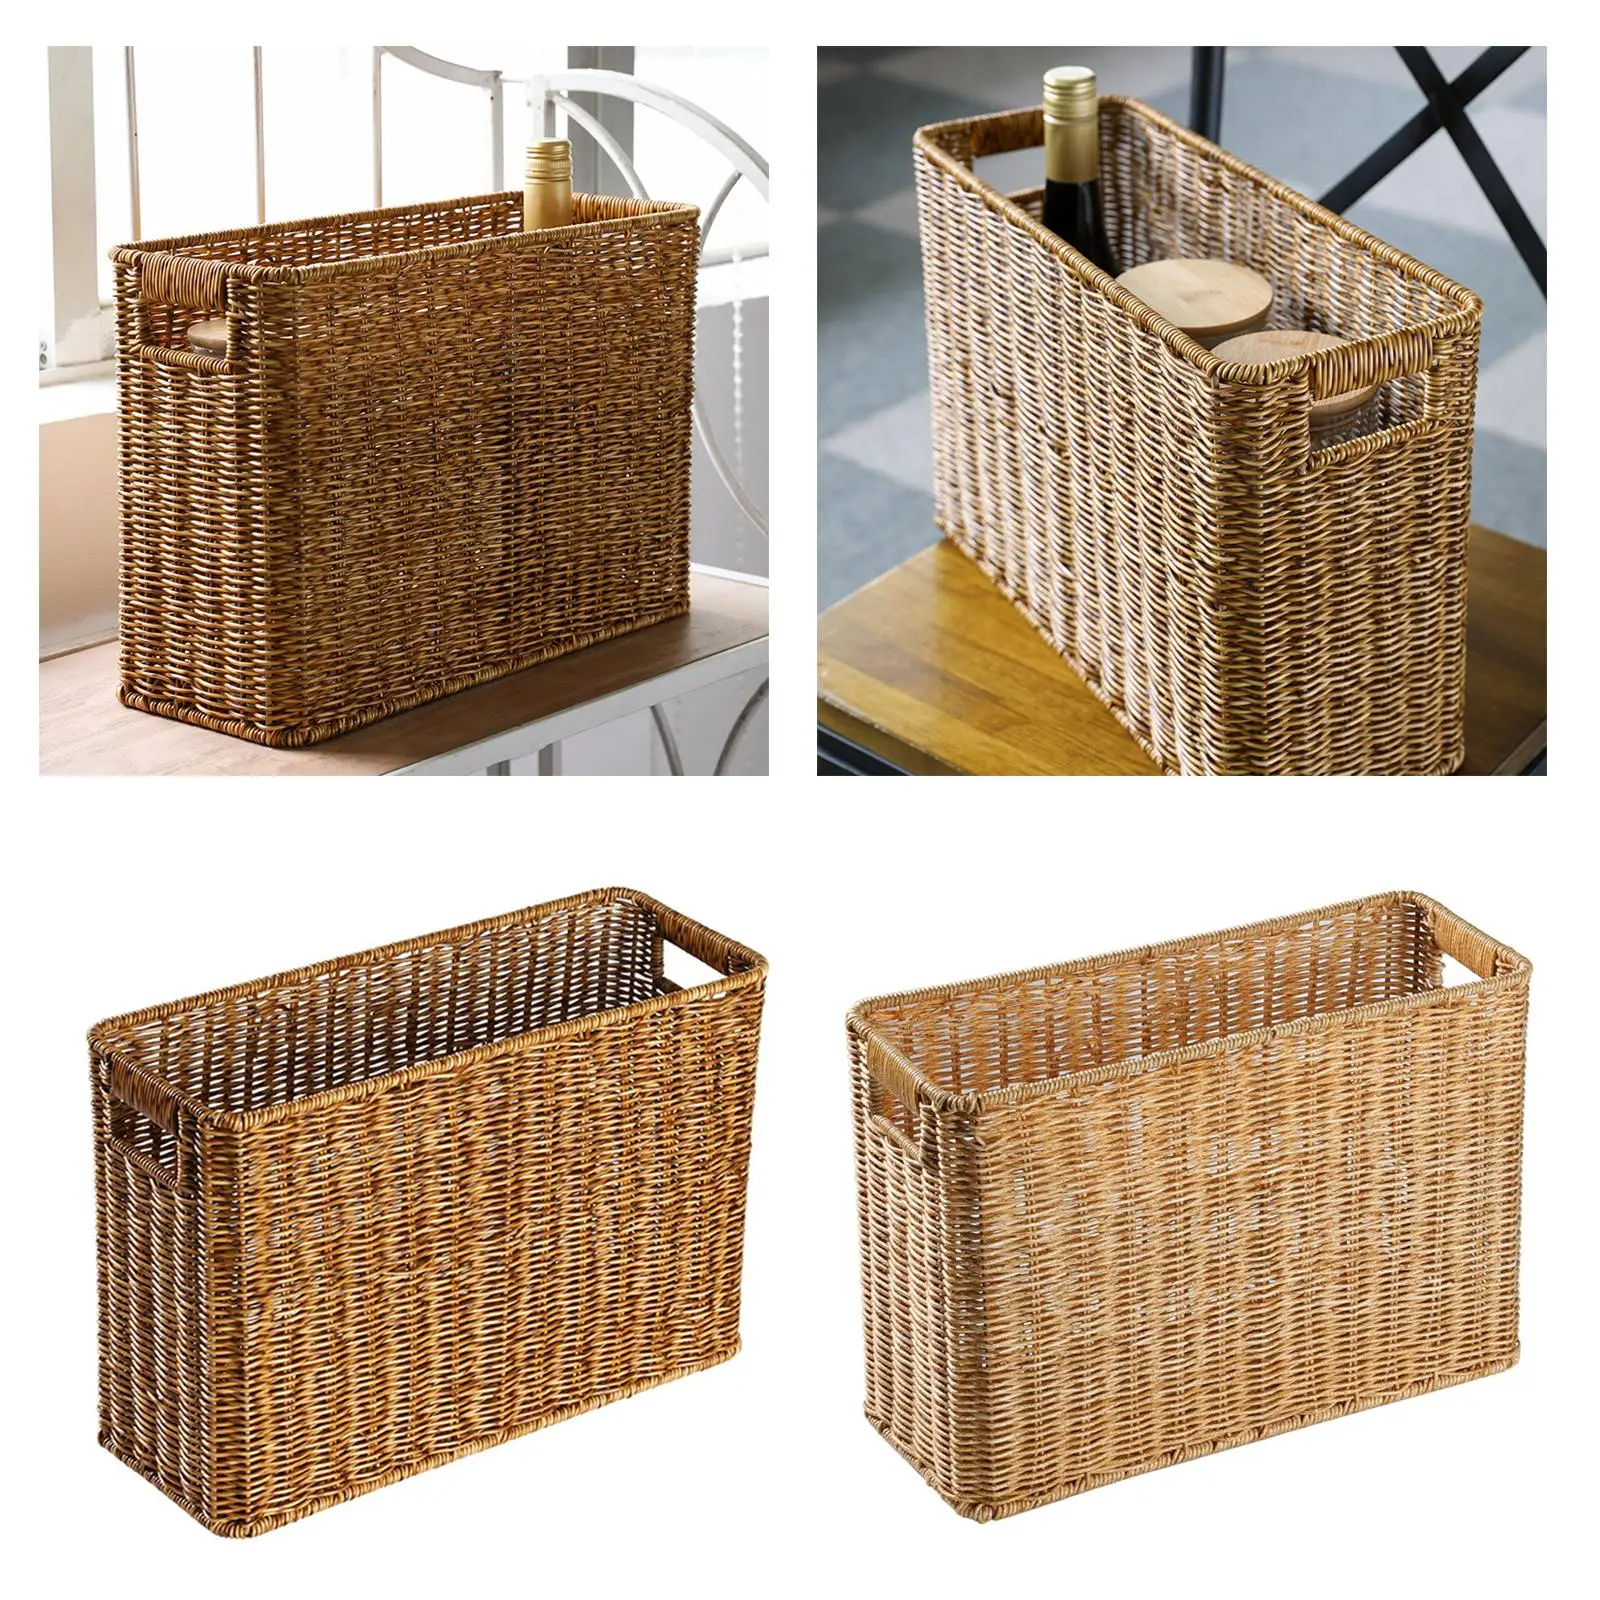 Rattan-Like Magazine Basket Containers Multifunctional Rectangle with Handles Basket Storage for Magazine Newspaper Cabinets